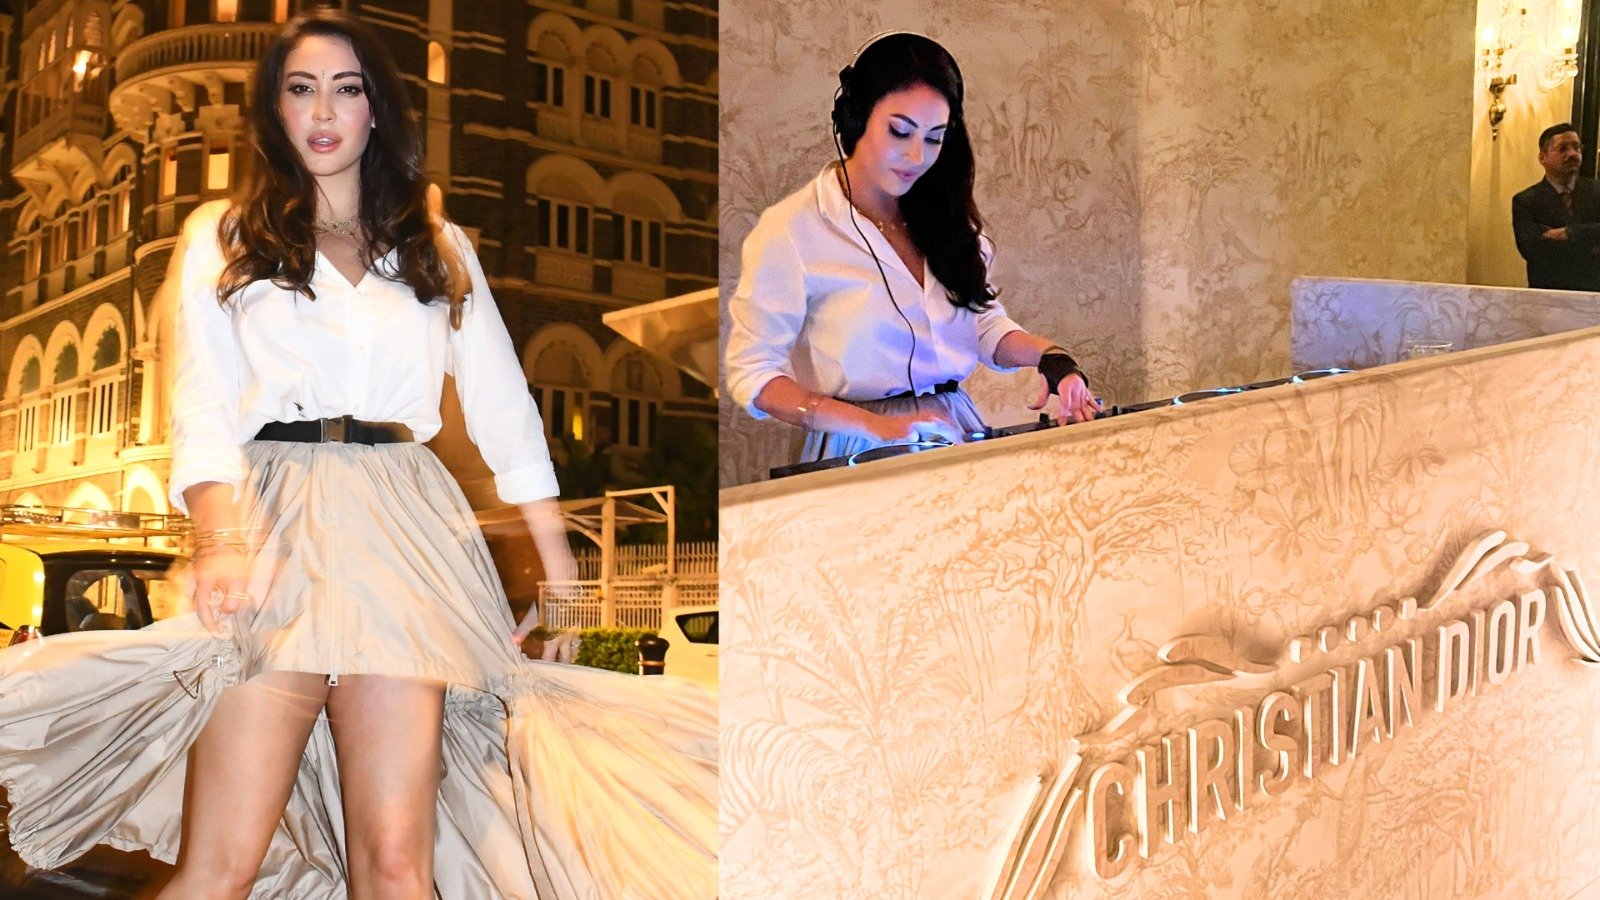 DJ Nina Shah sets the mood on fire at Christian Dior’s Fall 2023 show, merging music and culture in a monumental moment in history